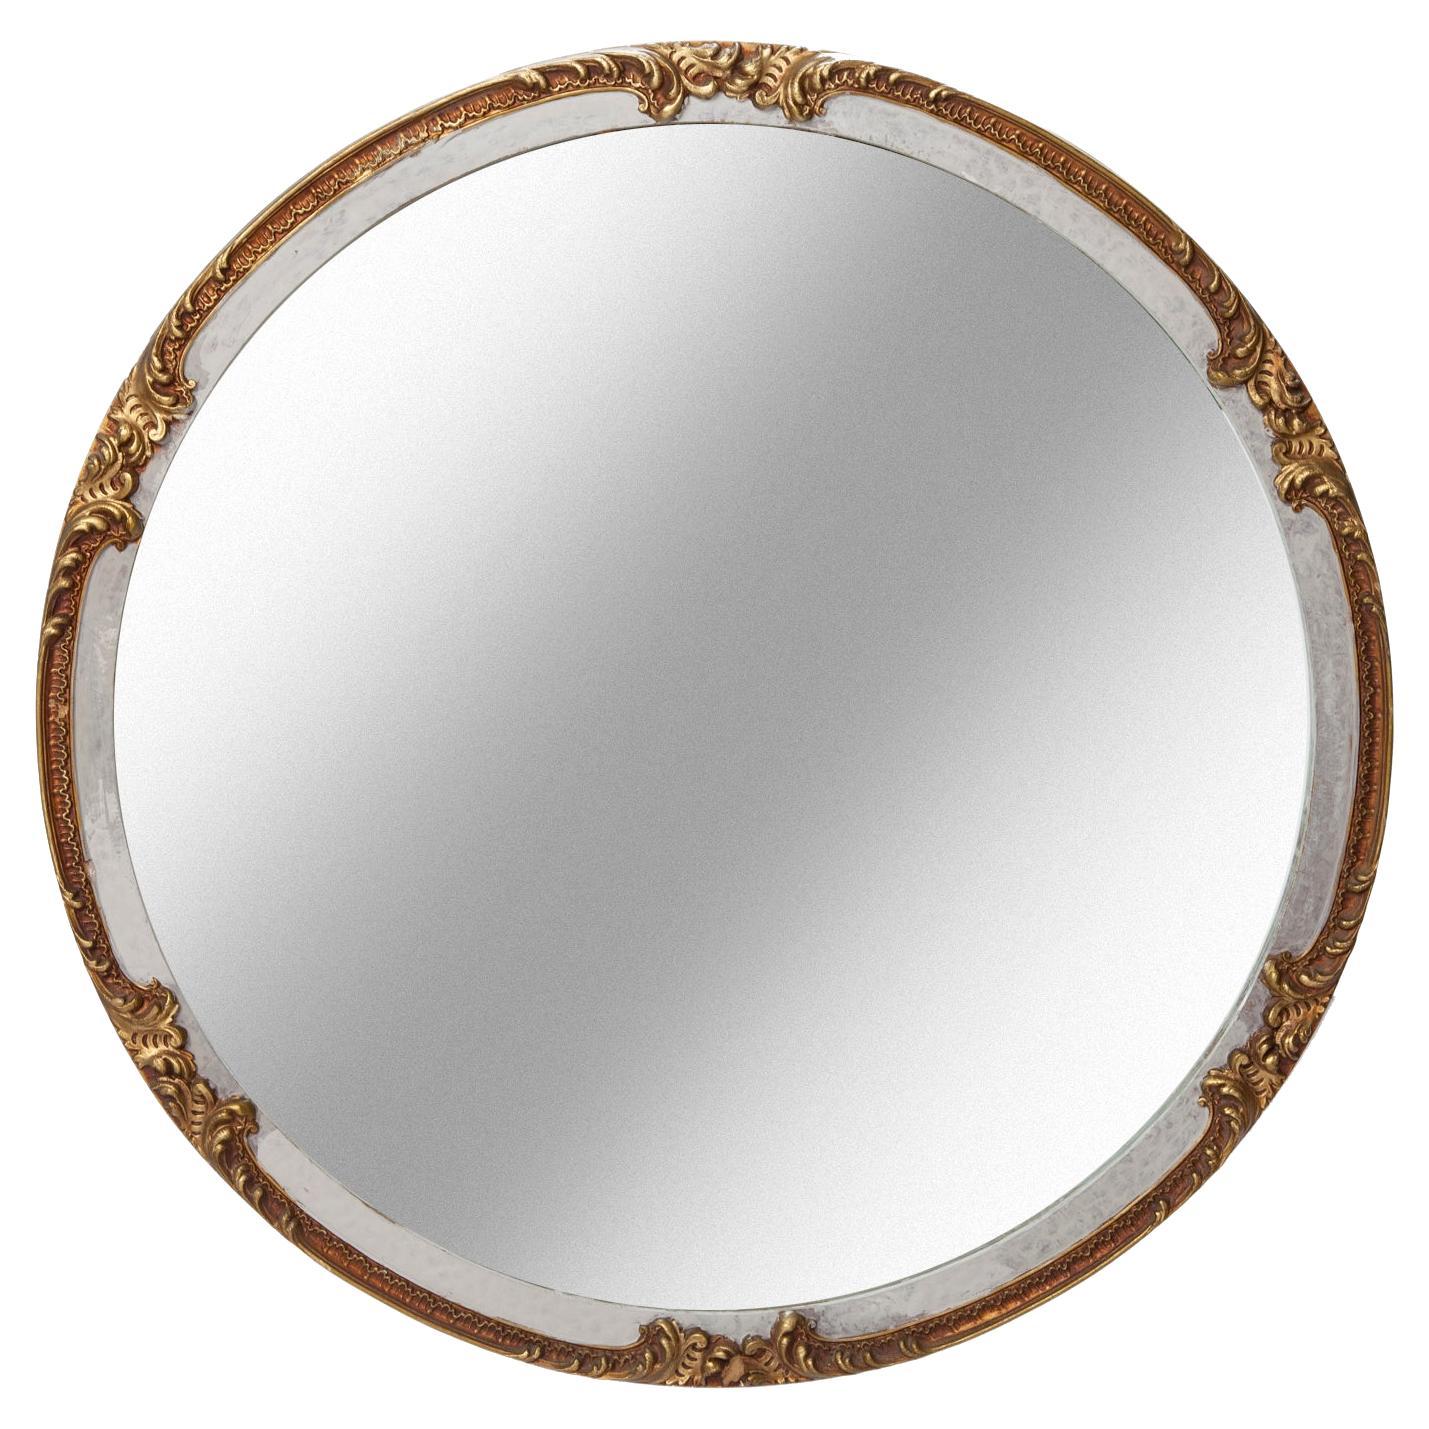 Late Deco Round Two Toned Mirror 